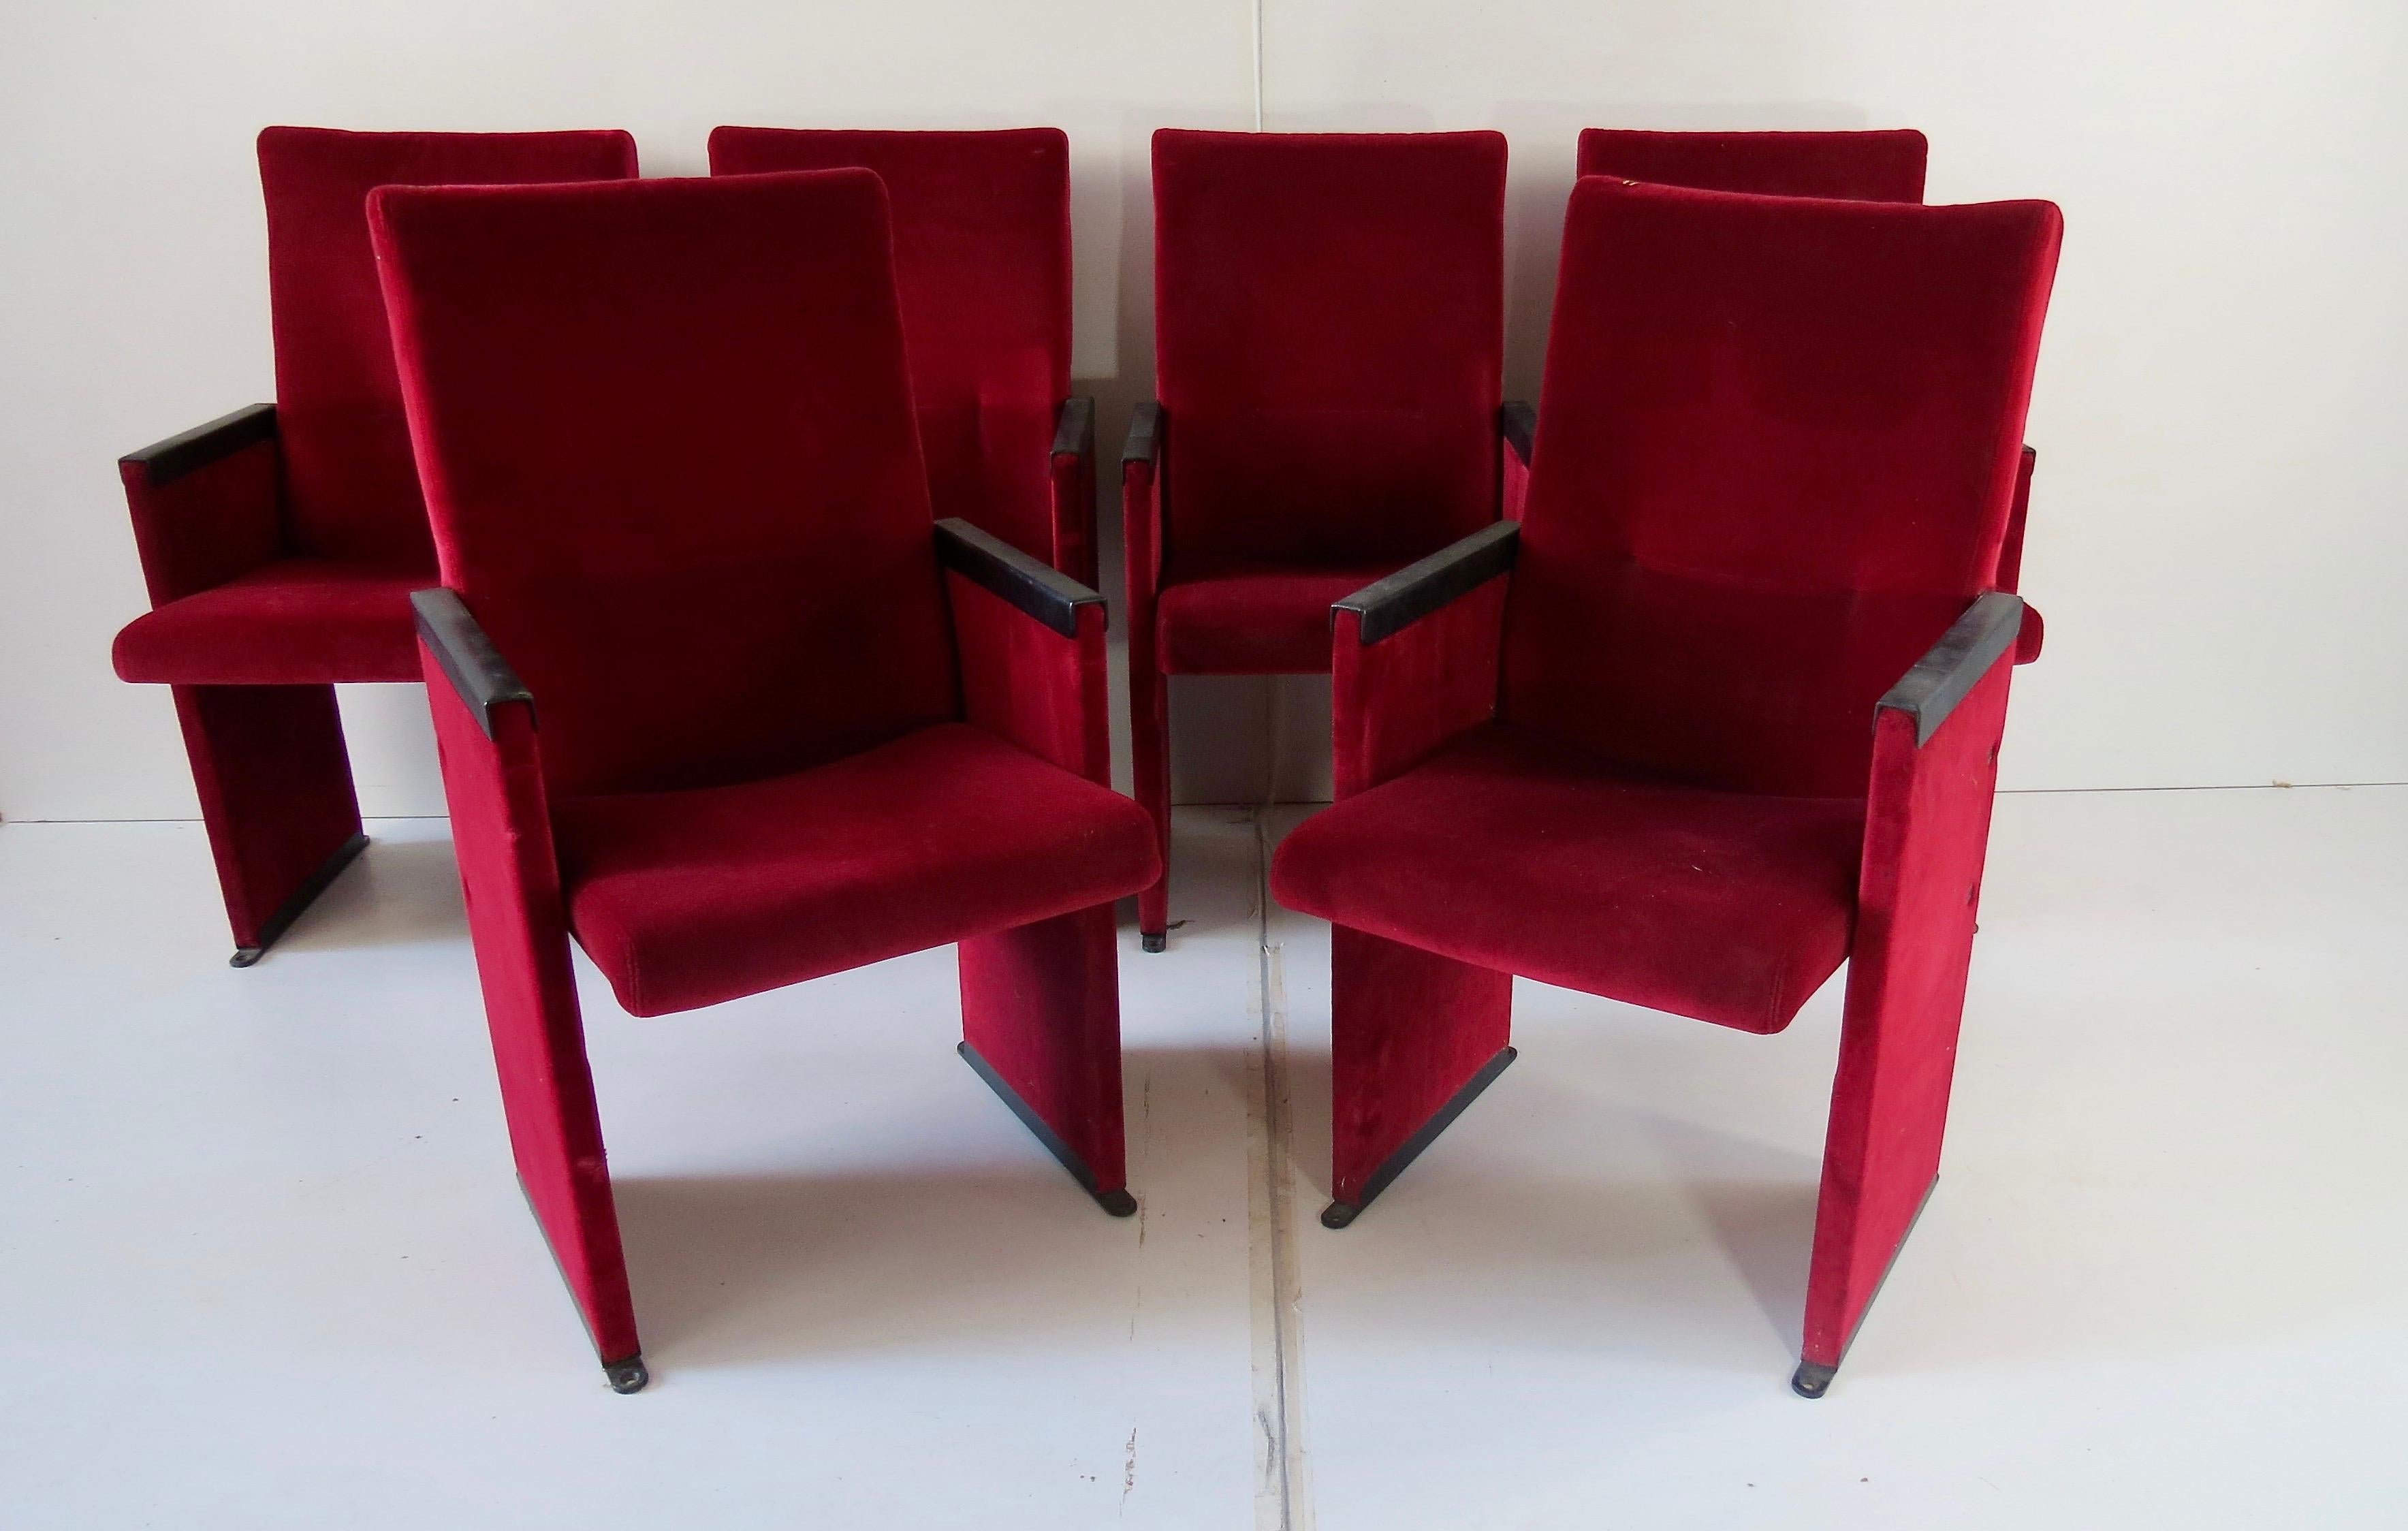 An iconic set of 12 chairs designed by Carlo Scarpa for the Auditorium in Via della Conciliazione, Rome
on a project by Architect Marcello Piacentini 1950
this set from the first and second row of the Auditorium
painted metal and red velvet
all